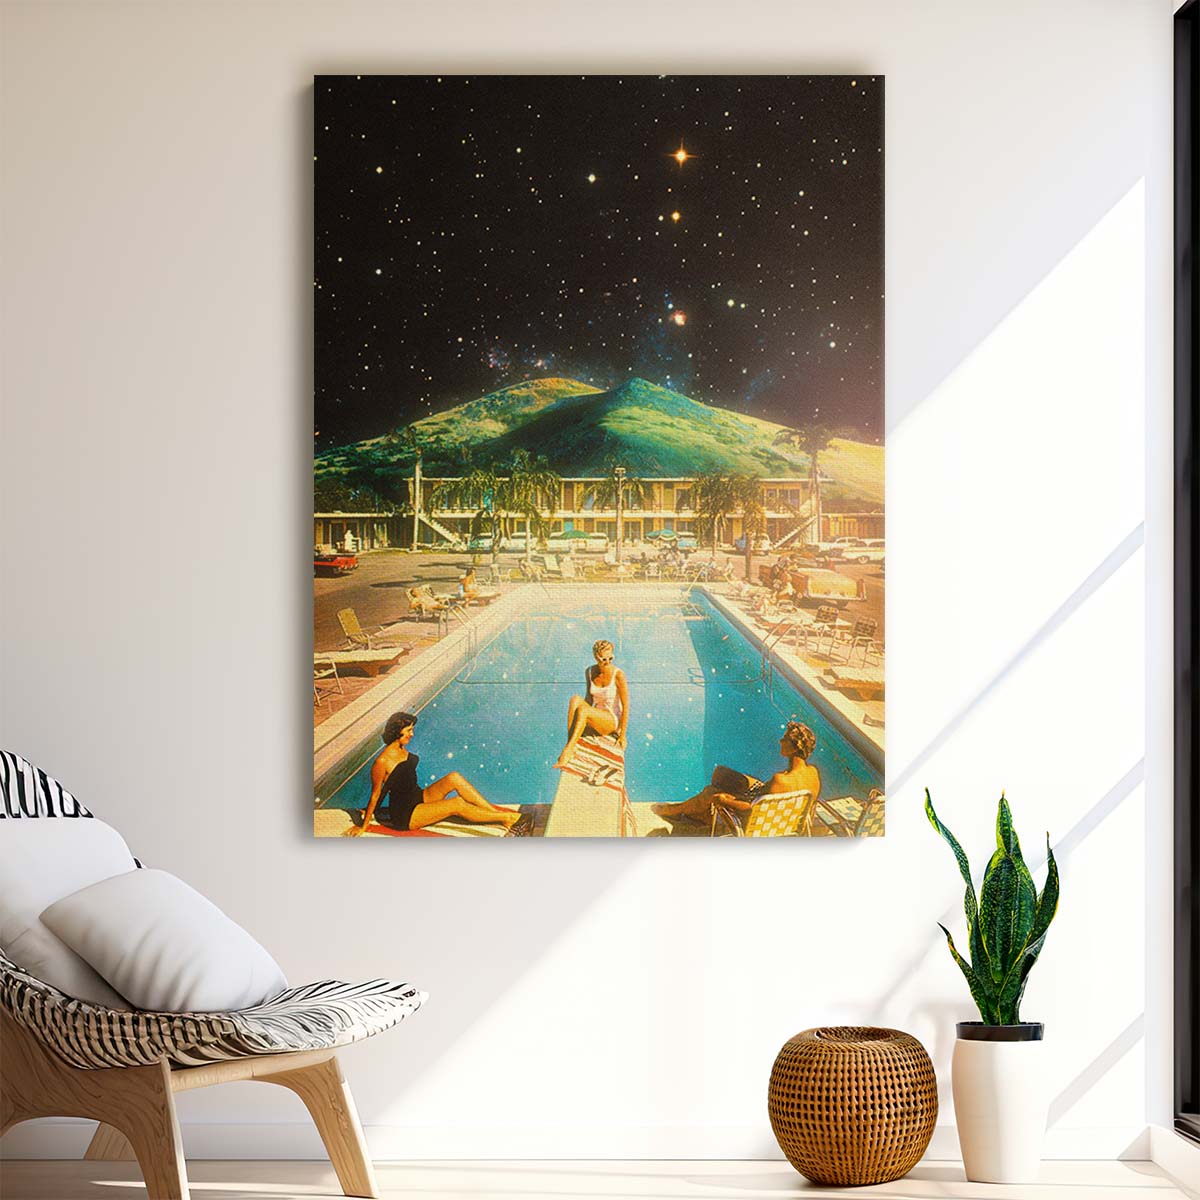 Retro Futuristic Space Pool Collage Illustration by Taudalpoi by Luxuriance Designs, made in USA